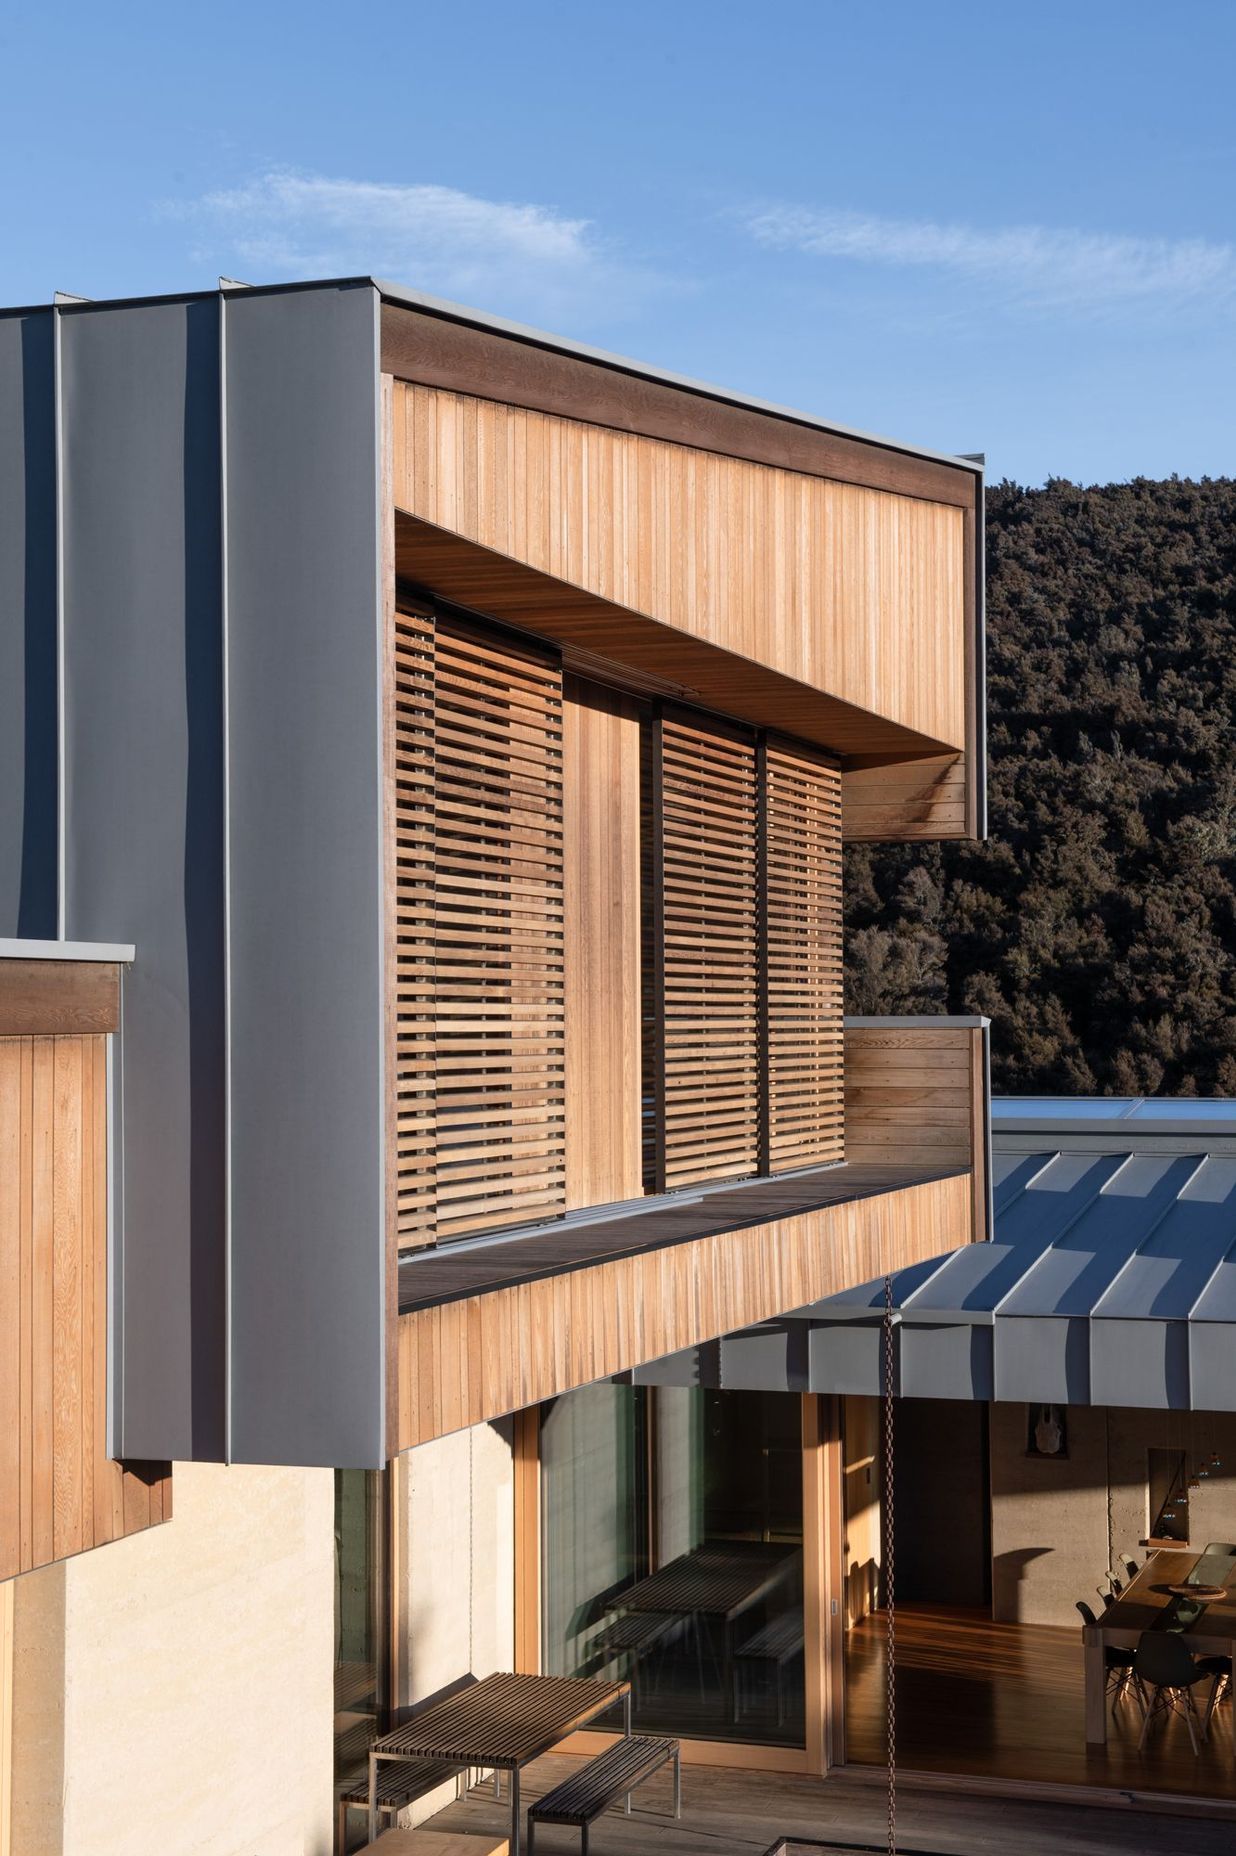 The exterior material palette comprises rammed earth, timber and zinc-coated aluminium.